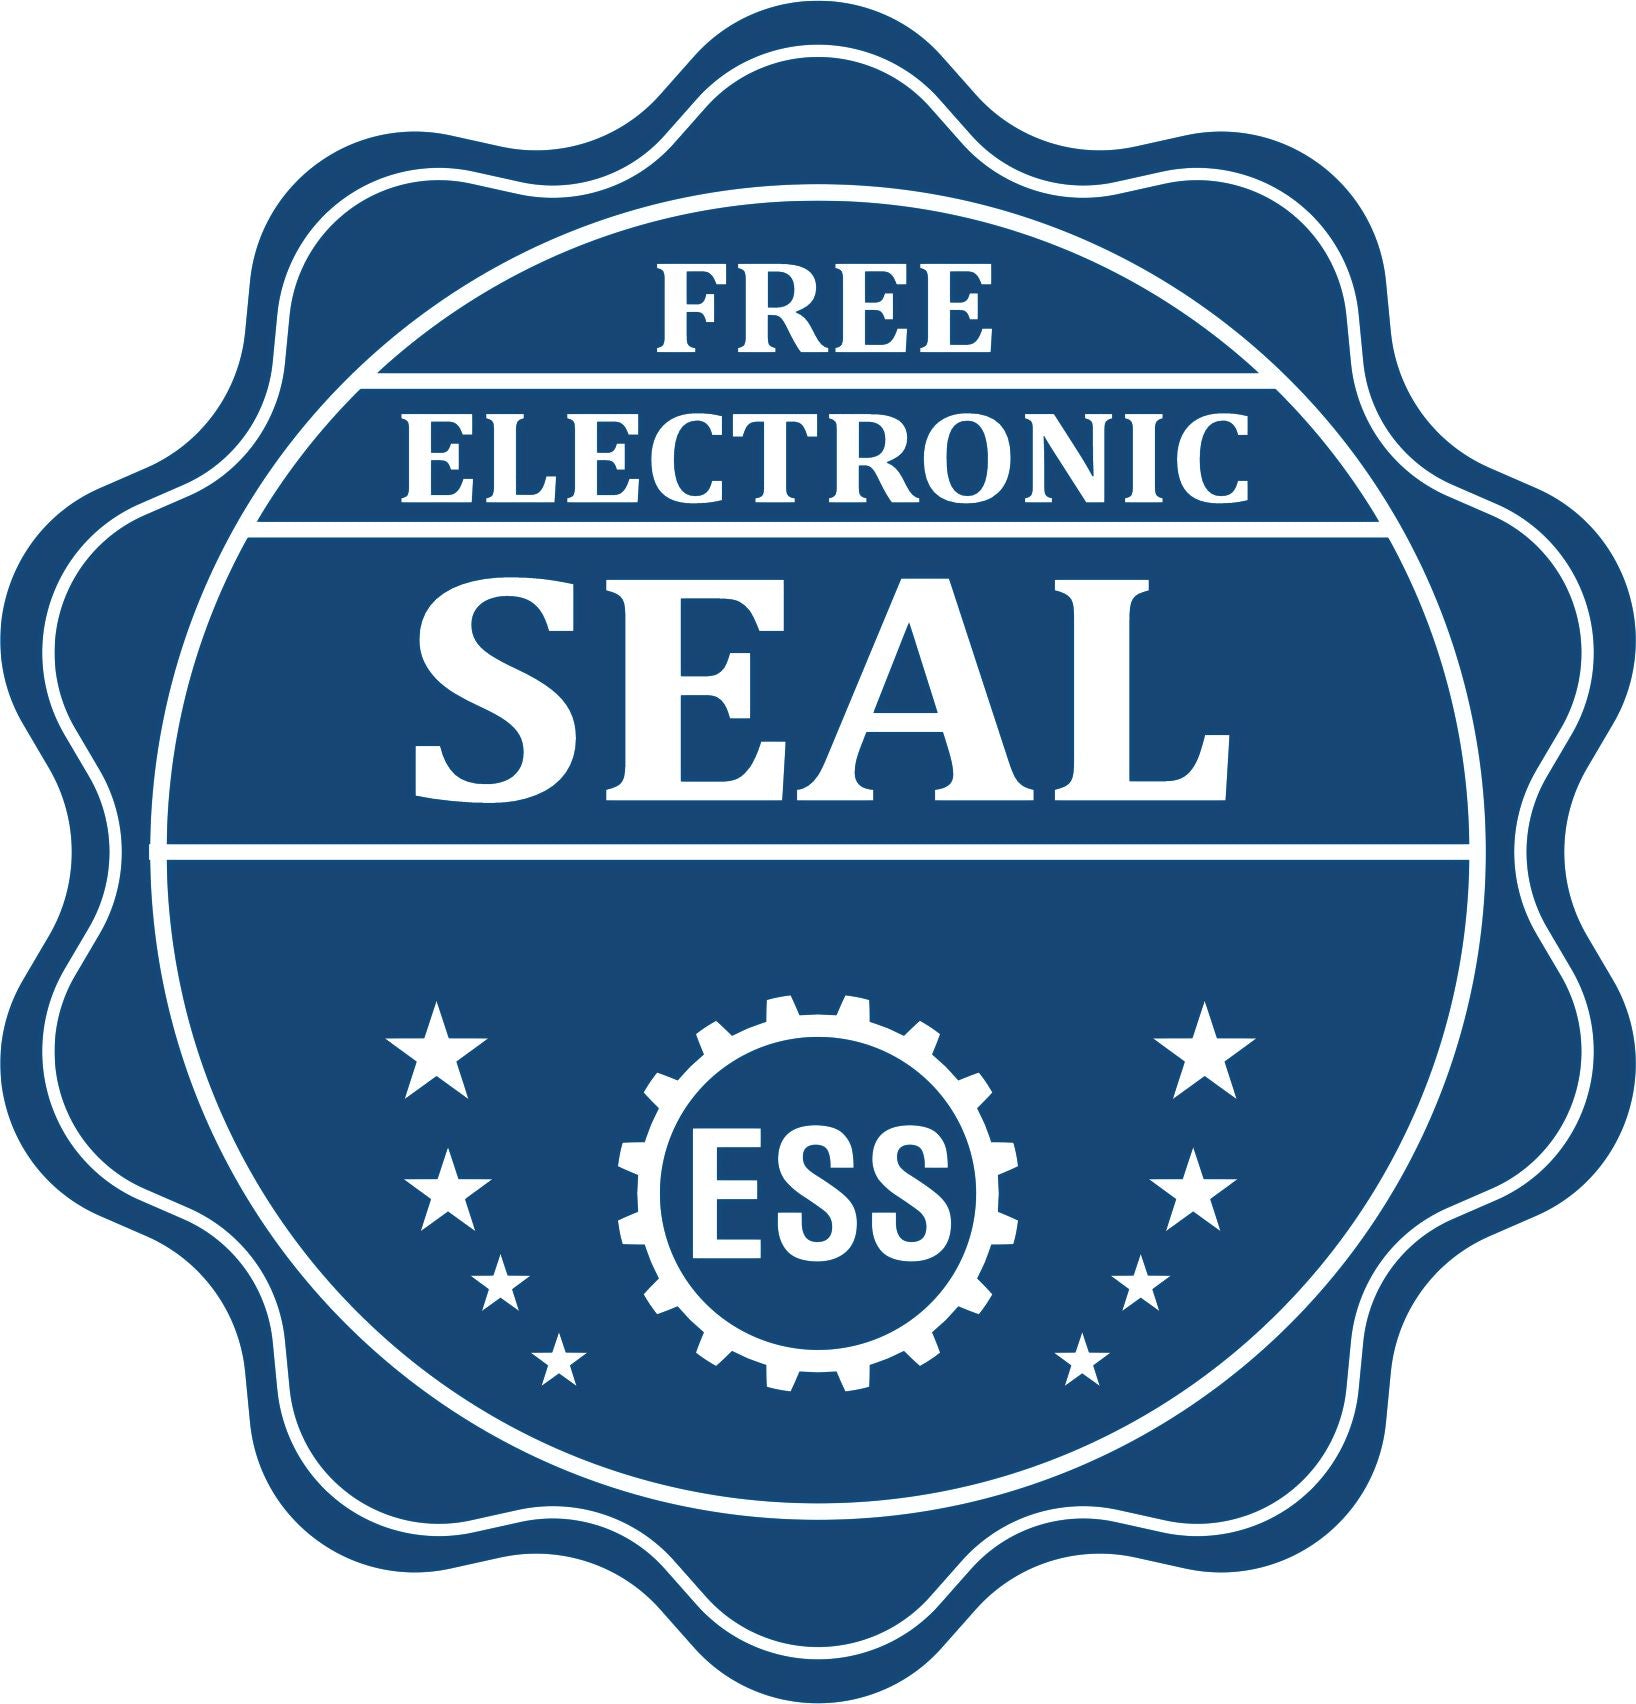 A badge showing a free electronic seal for the Illinois Desk Architect Embossing Seal with stars and the ESS gear on the emblem.